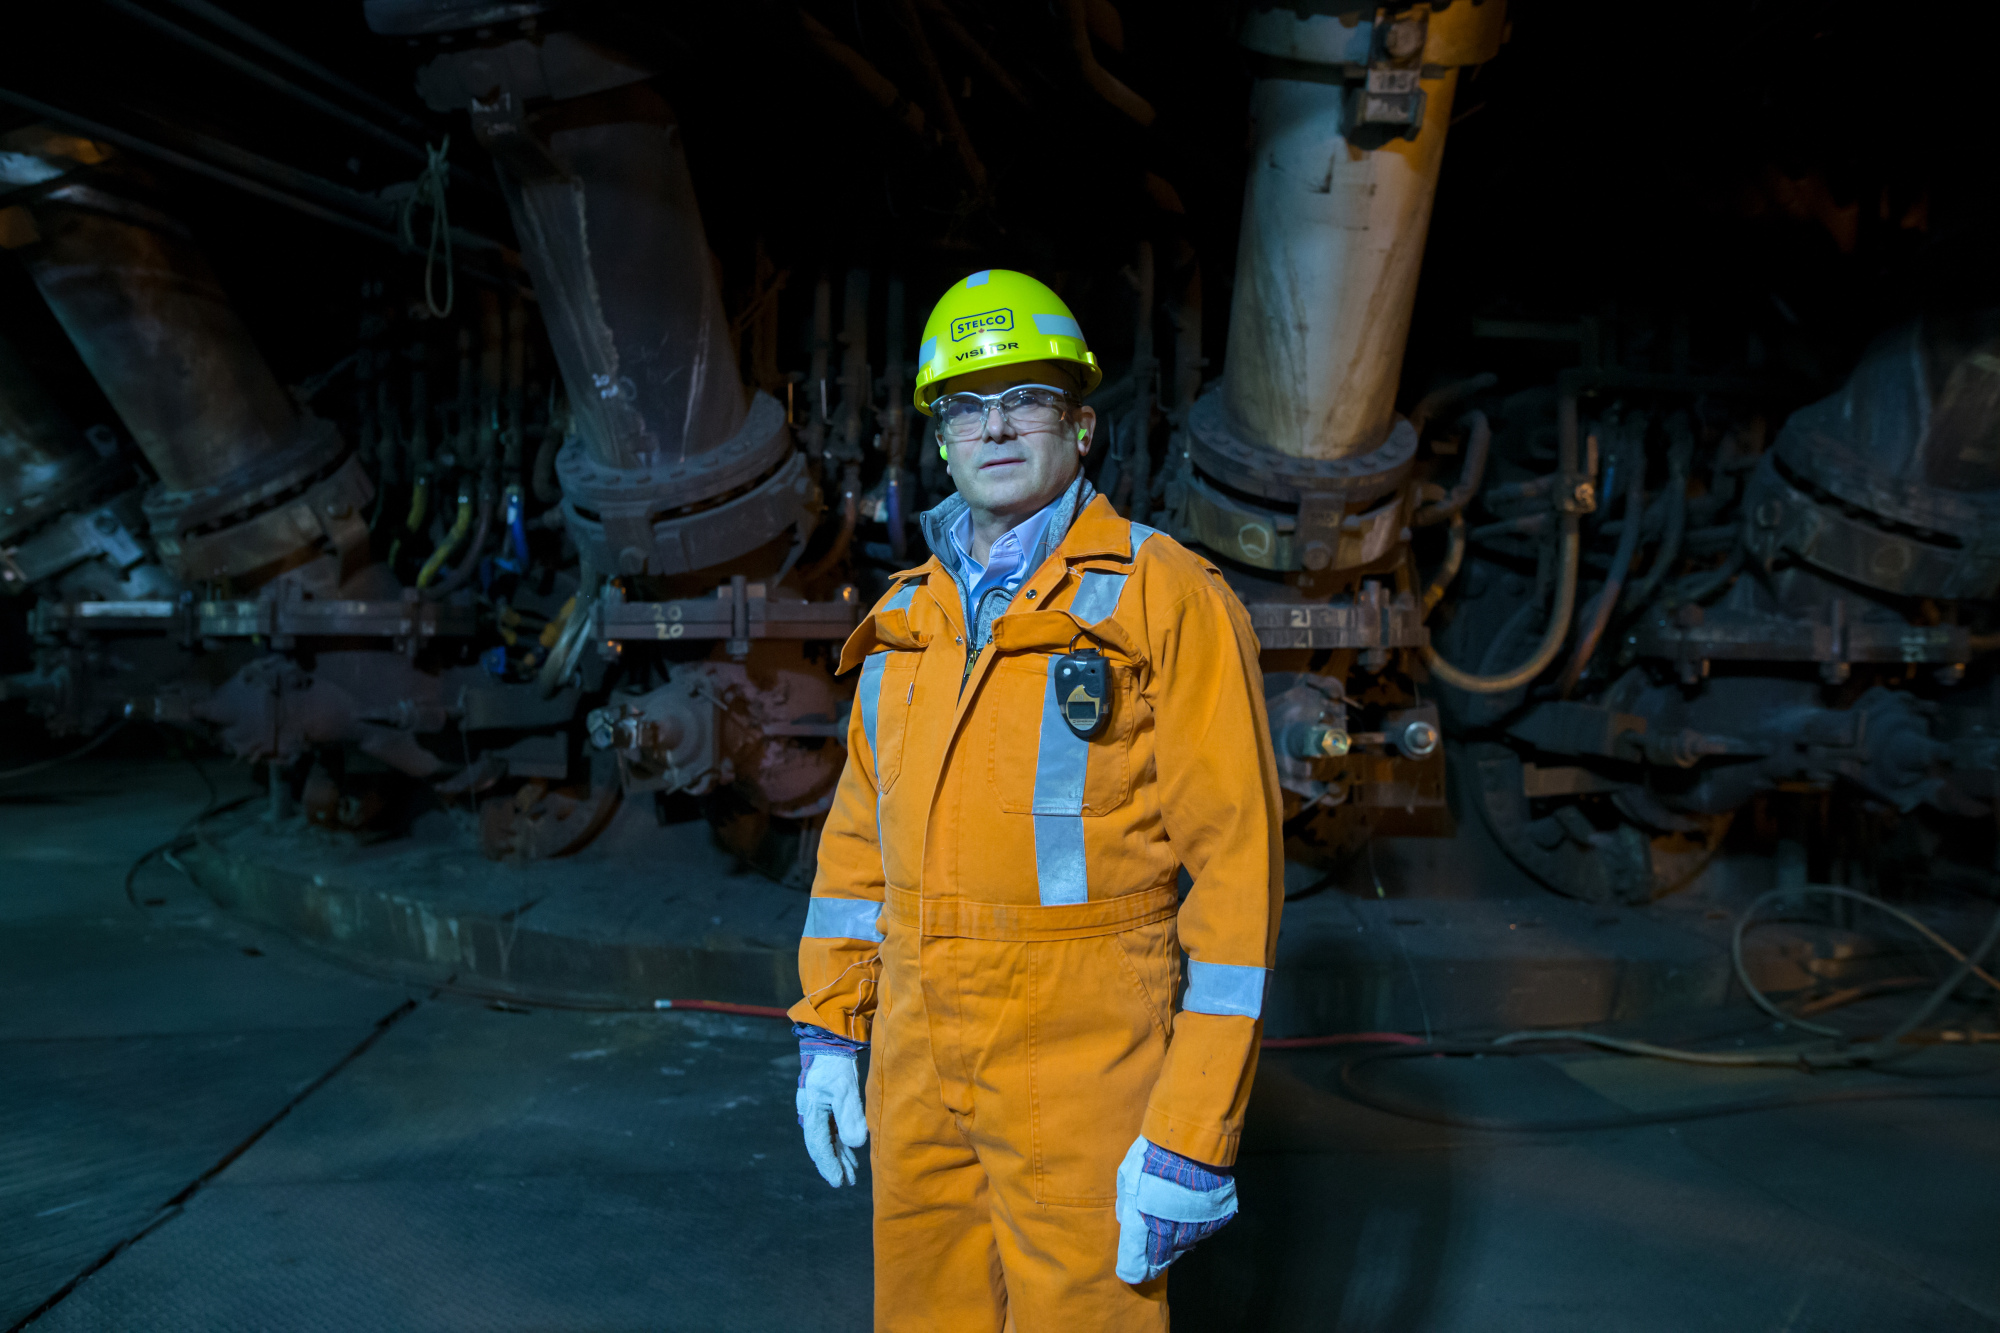 Alan Kestenbaum, chief executive officer of&nbsp;Stelco&nbsp;Holdings Inc.,&nbsp;at the company's plant in Nanticoke, Canada in 2017.